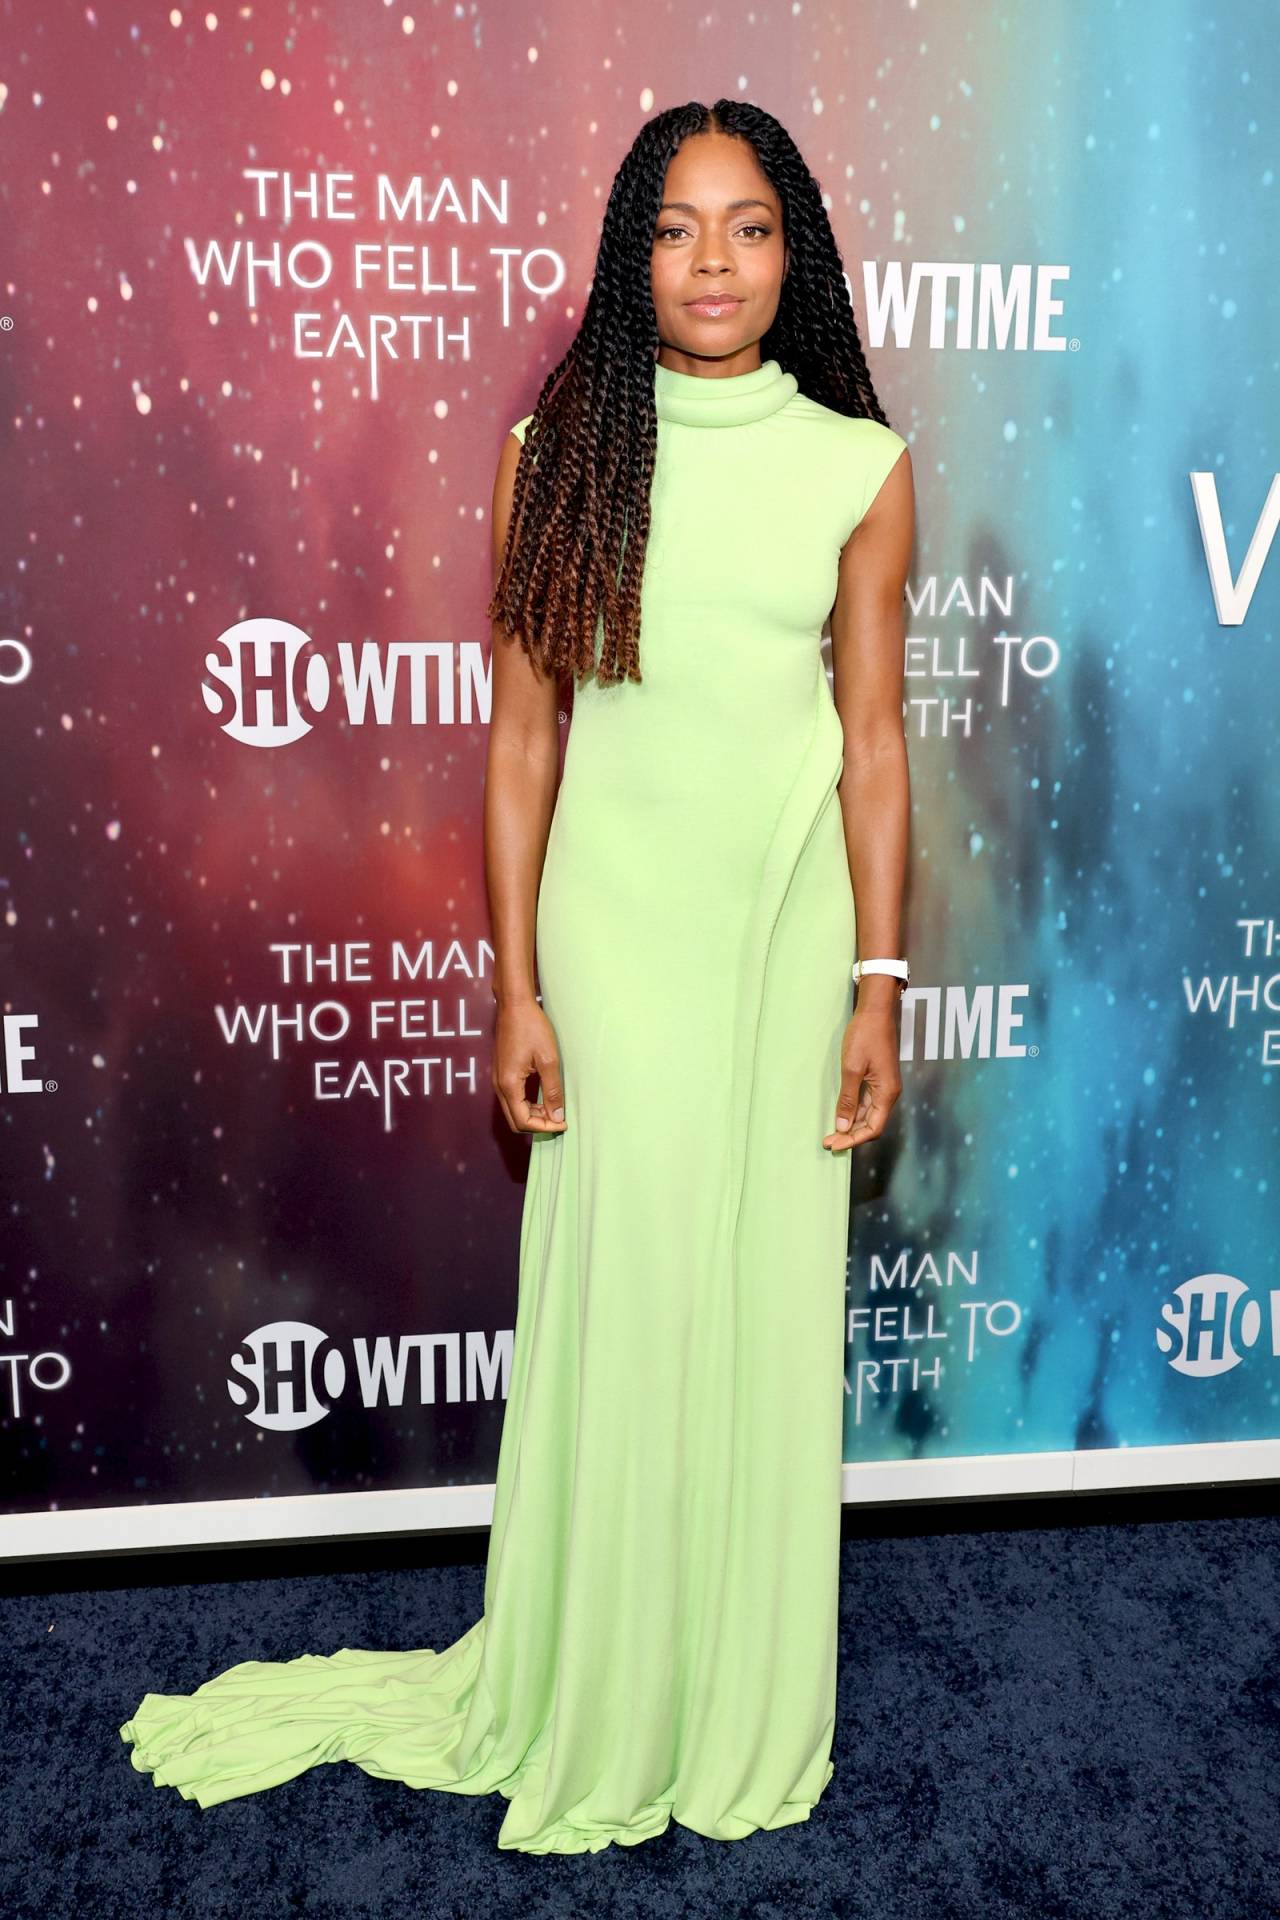 Society: WHO | WHAT | WHERE| WHENWHO: Naomie Harris
WHAT: Standing Ground 
WHERE: The Man Who Fell To Earth Premiere 
WHEN: April 19  WHO: Zendaya 
WHAT: Fear of God
WHERE: Euphoria HBO Max For Your Consideration Event 
WHEN: April 20  WHO: Laura Harrier
WHAT: Burberry 
WHERE: Burberry & Riccardo Tisci Lola Bag Celebration 
WHEN: April 20 #society#society pages#naomie harris#zendaya#lauara harrier#beautyintheblackness#vogue#high fashion#fashion#womenstyle#black women#black beauty#black celebrities#black actresses#actresses#celebrities